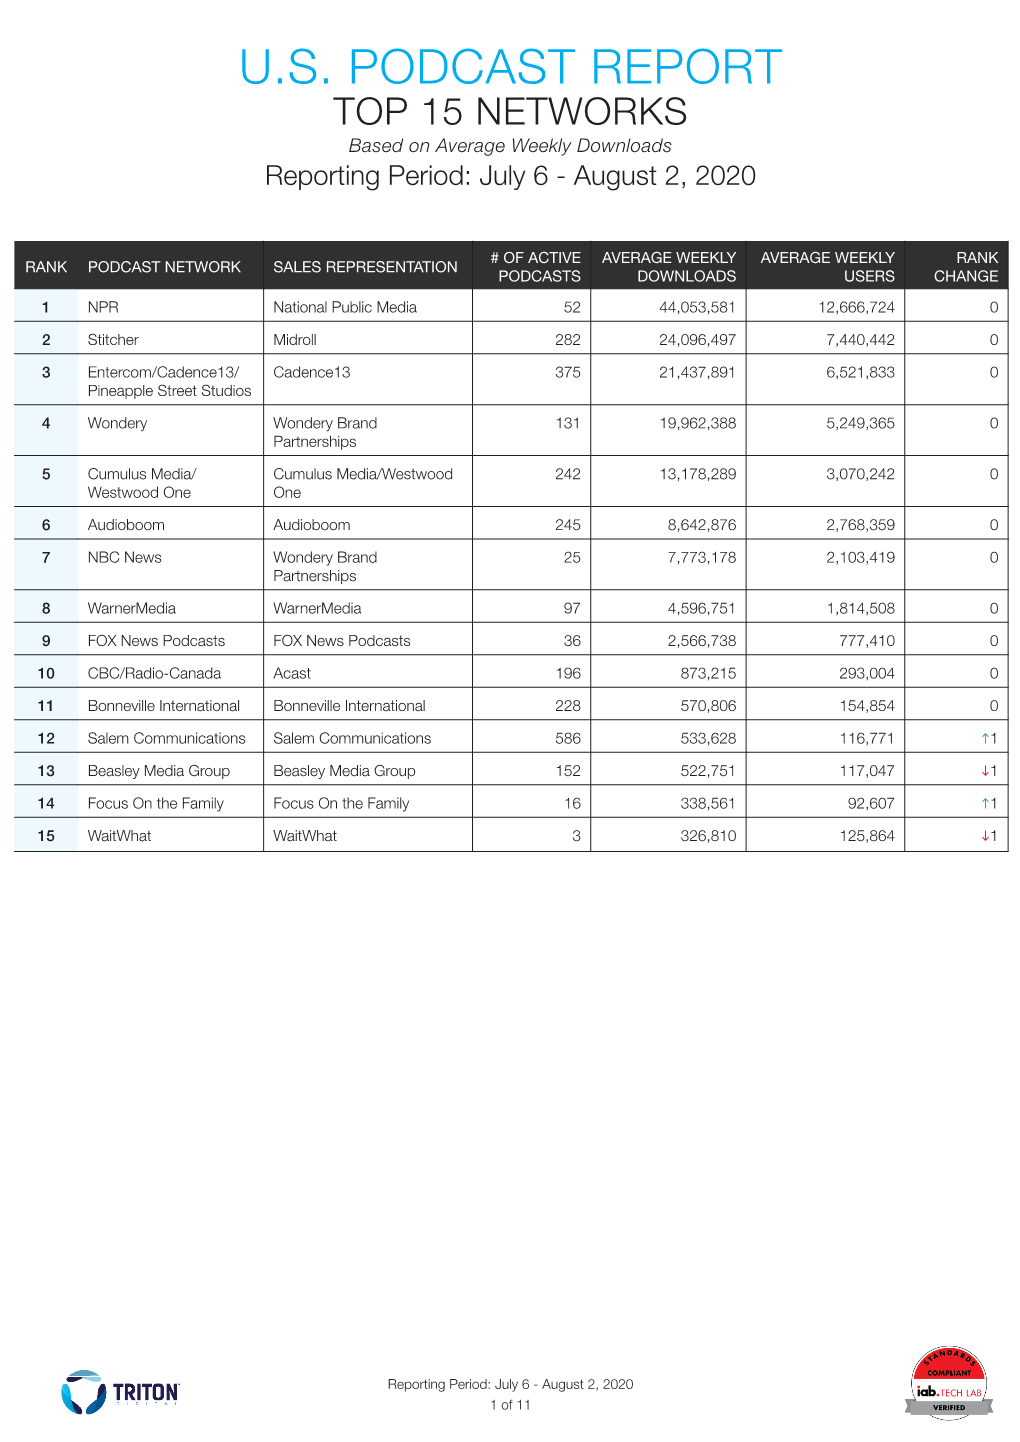 U.S. PODCAST REPORT TOP 15 NETWORKS Based on Average Weekly Downloads Reporting Period: July 6 - August 2, 2020